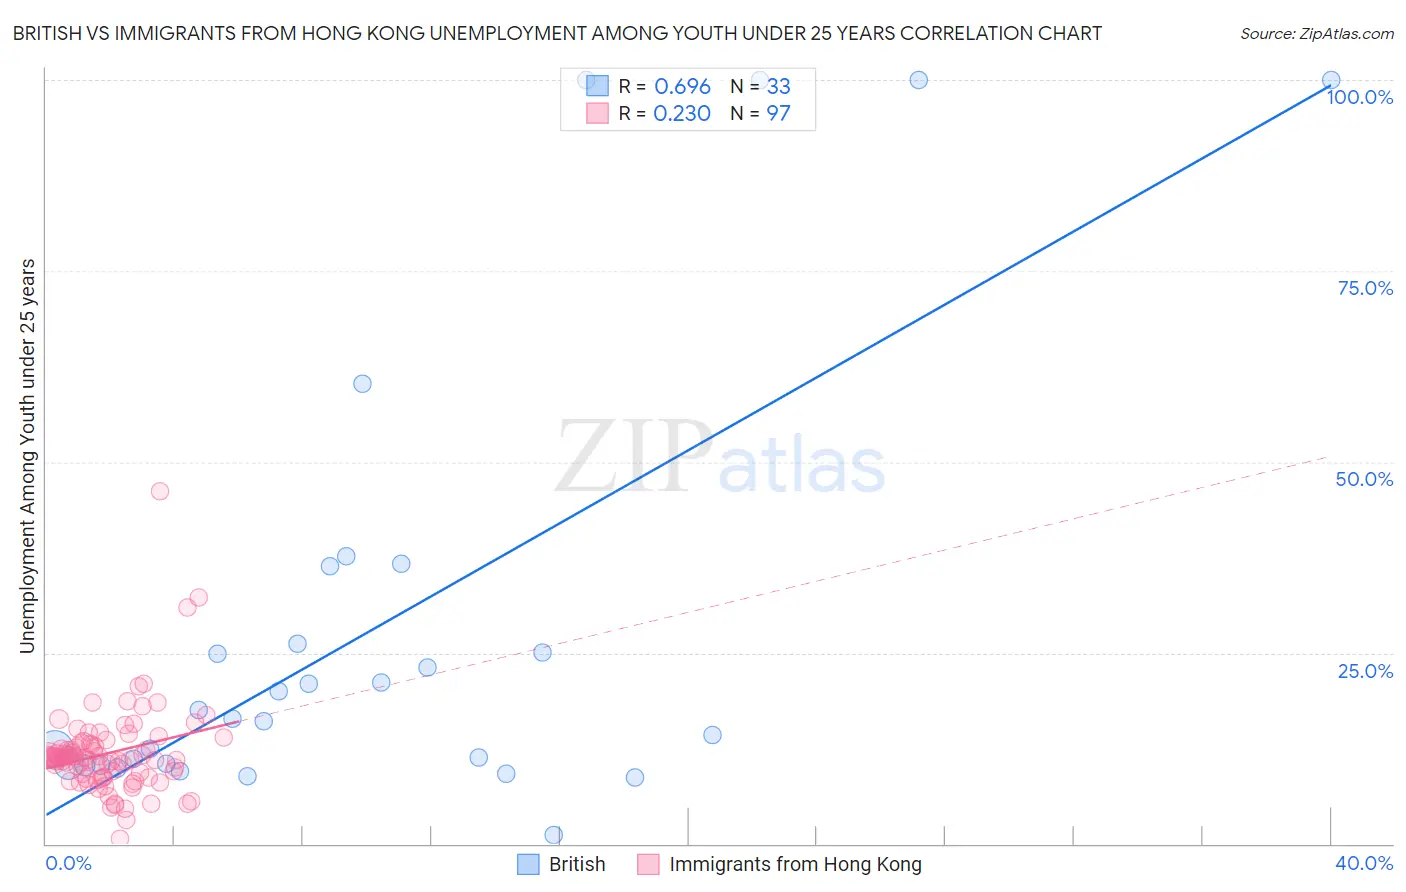 British vs Immigrants from Hong Kong Unemployment Among Youth under 25 years